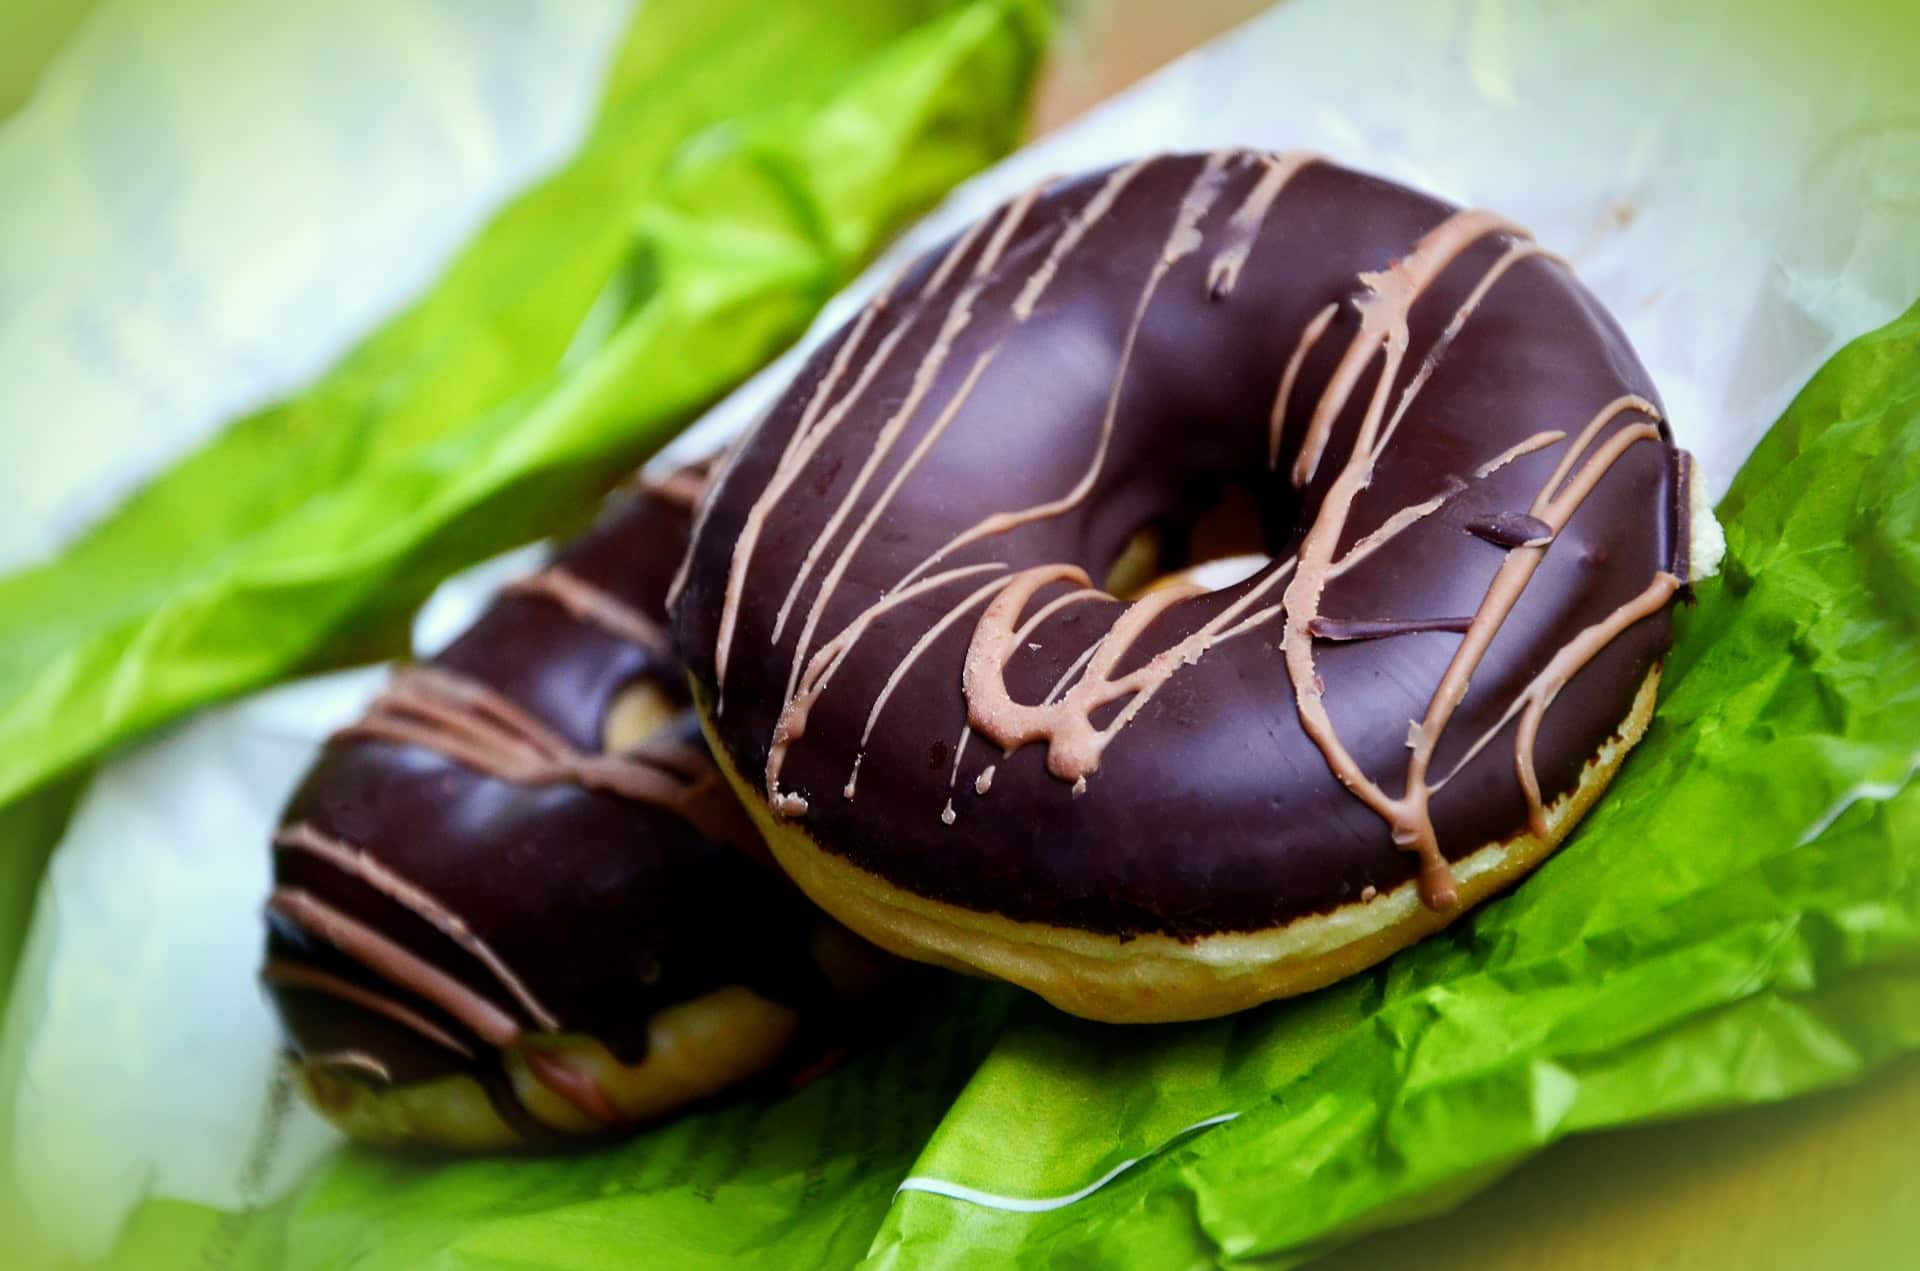 Donuts with chocolate icing on bright green napkins